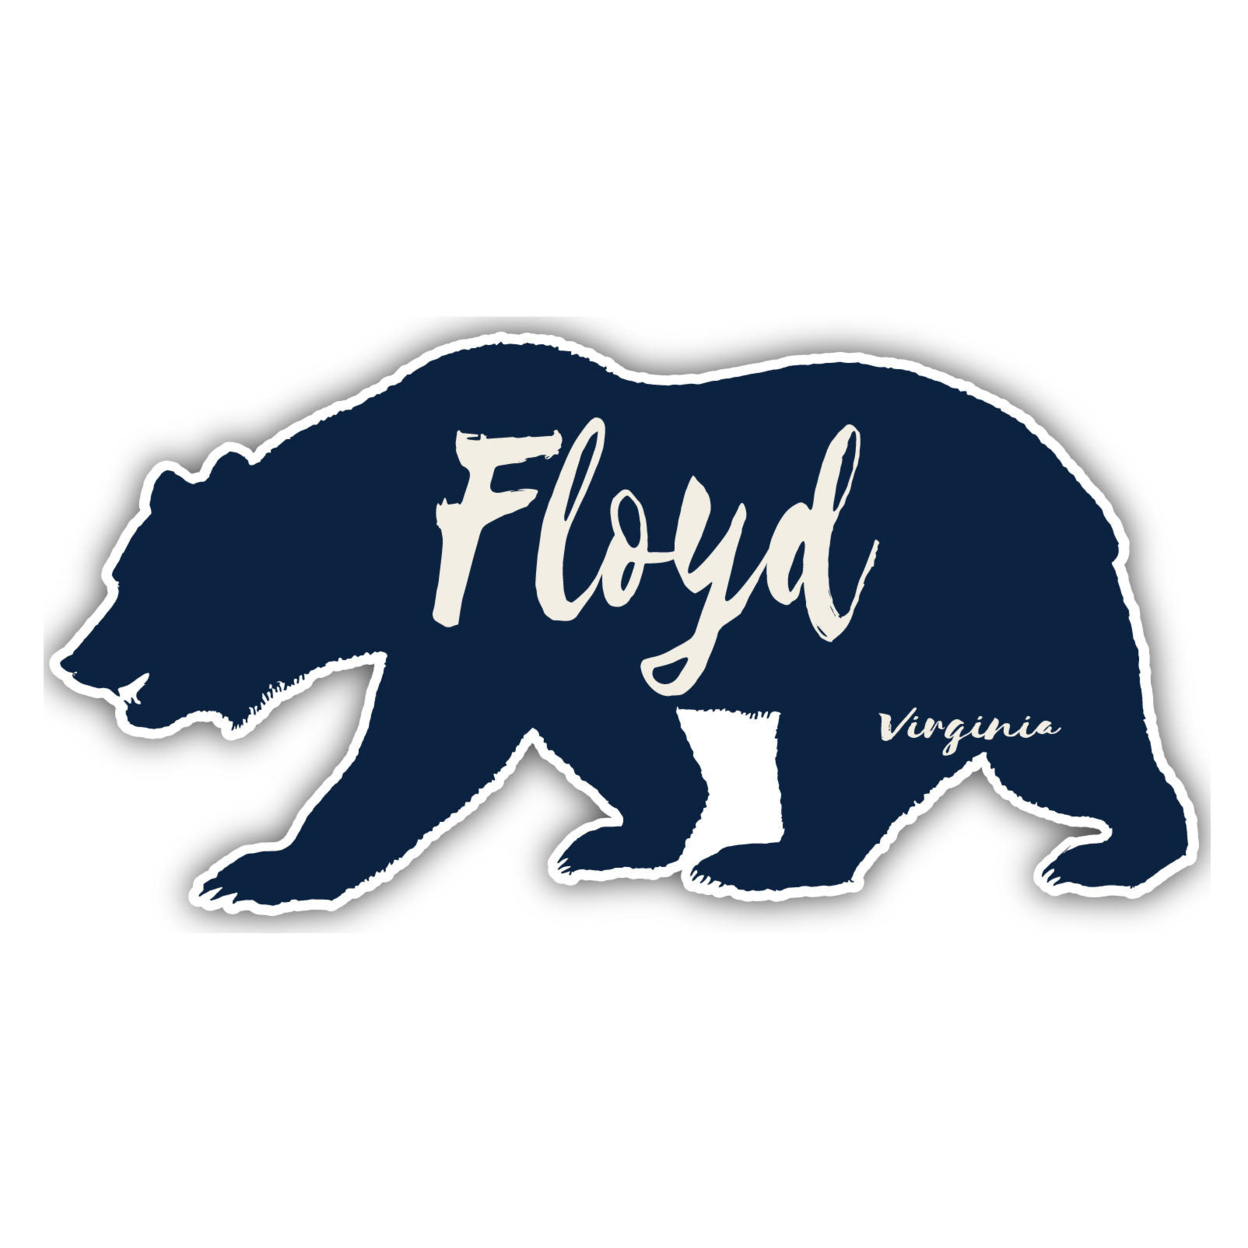 Floyd Virginia Souvenir Decorative Stickers (Choose Theme And Size) - 4-Pack, 12-Inch, Bear